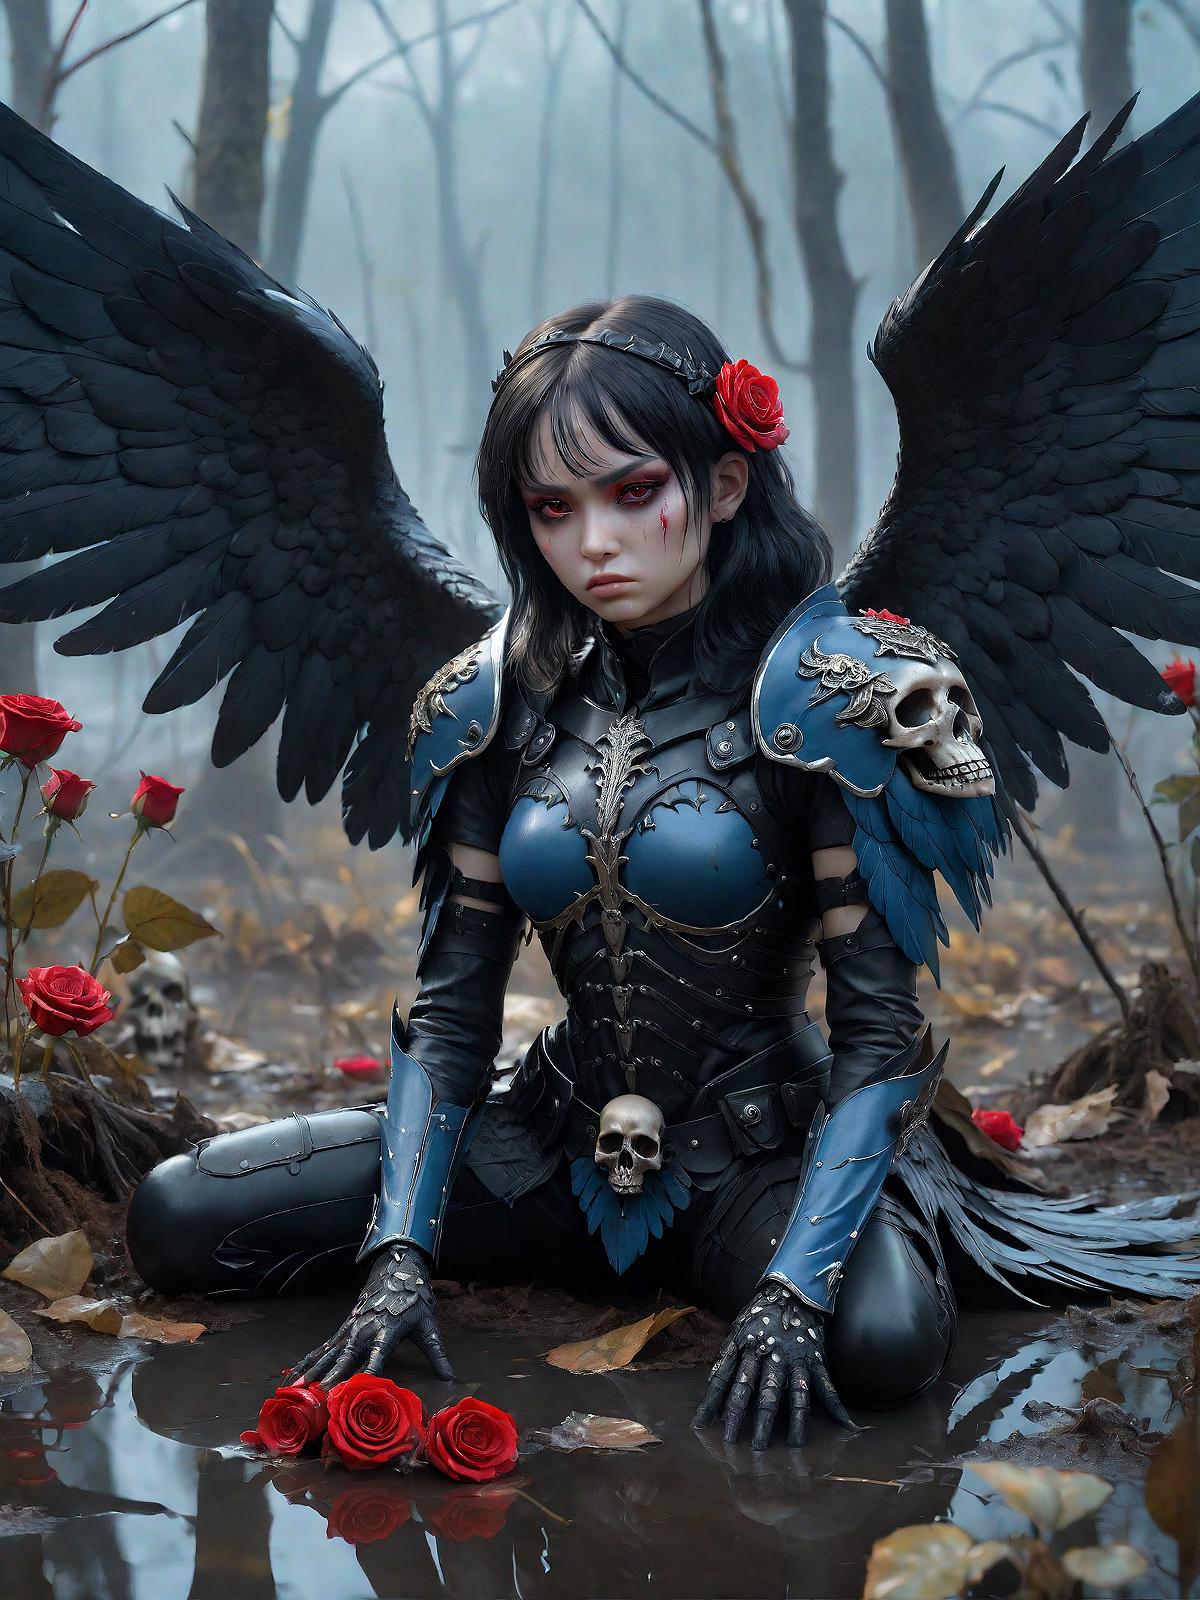 Anime-style blue and black angel with red roses in her hair and skull on her shoulder, sitting in a forest.